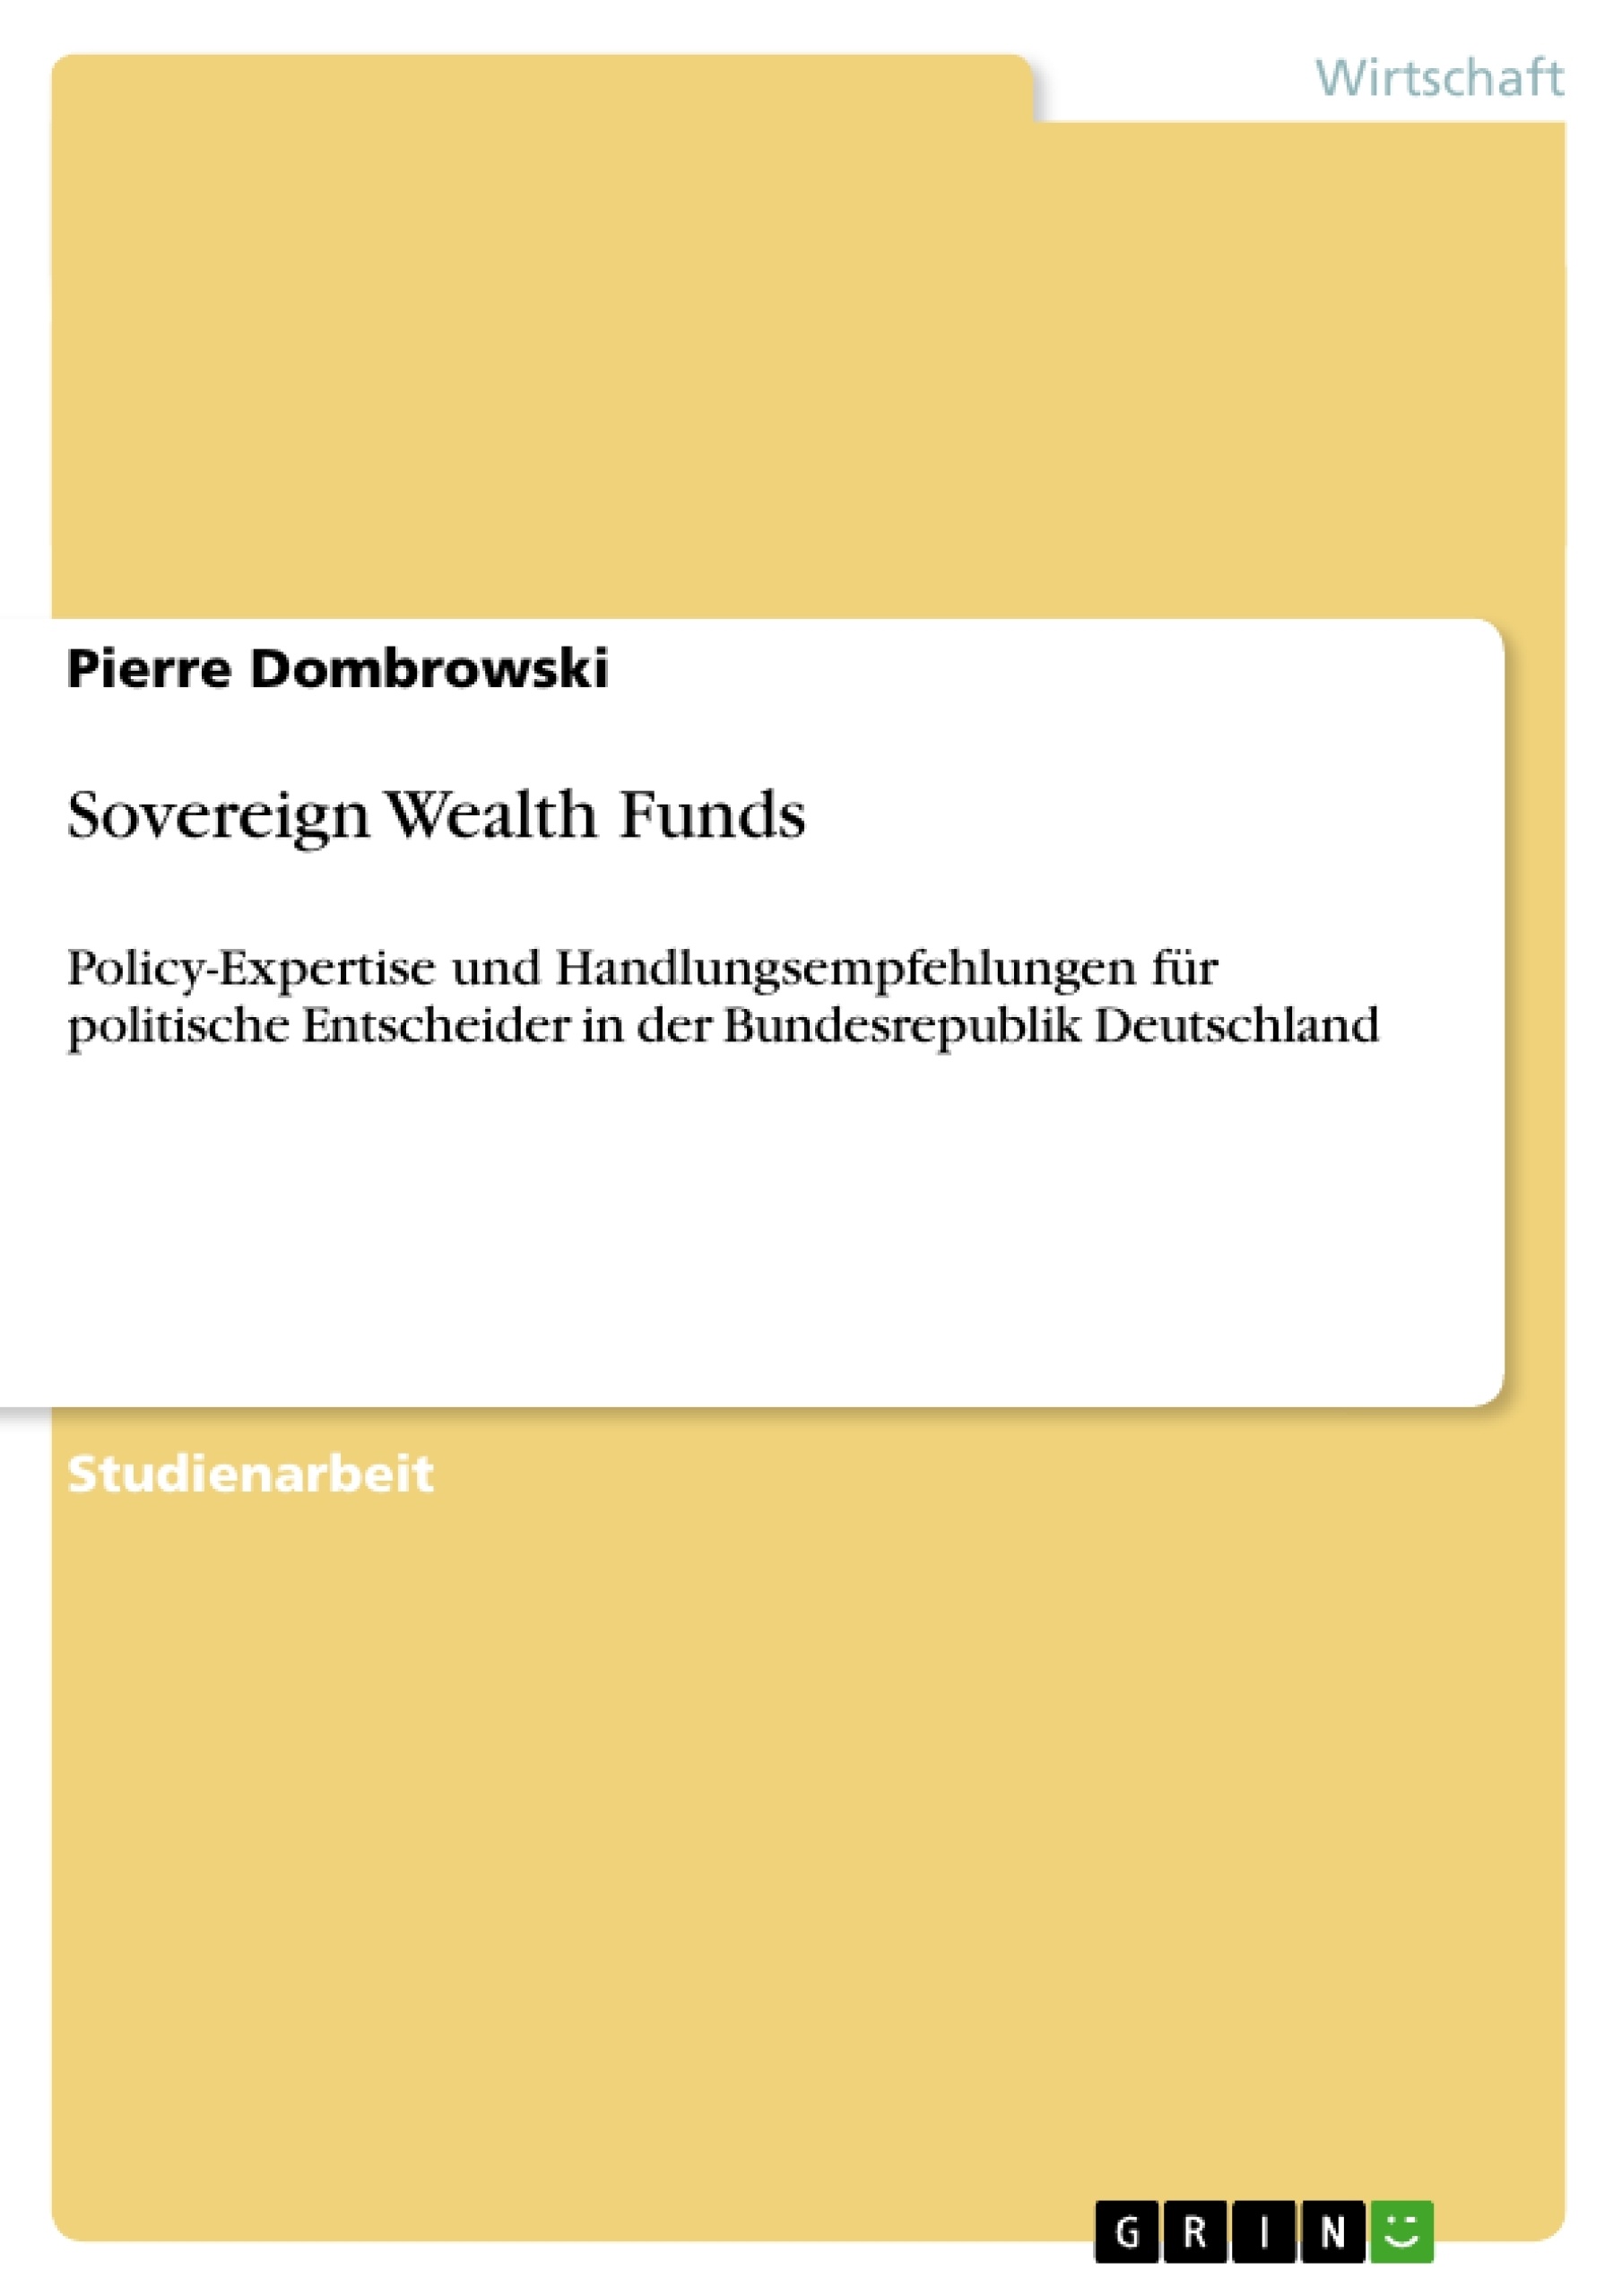 Título: Sovereign Wealth Funds